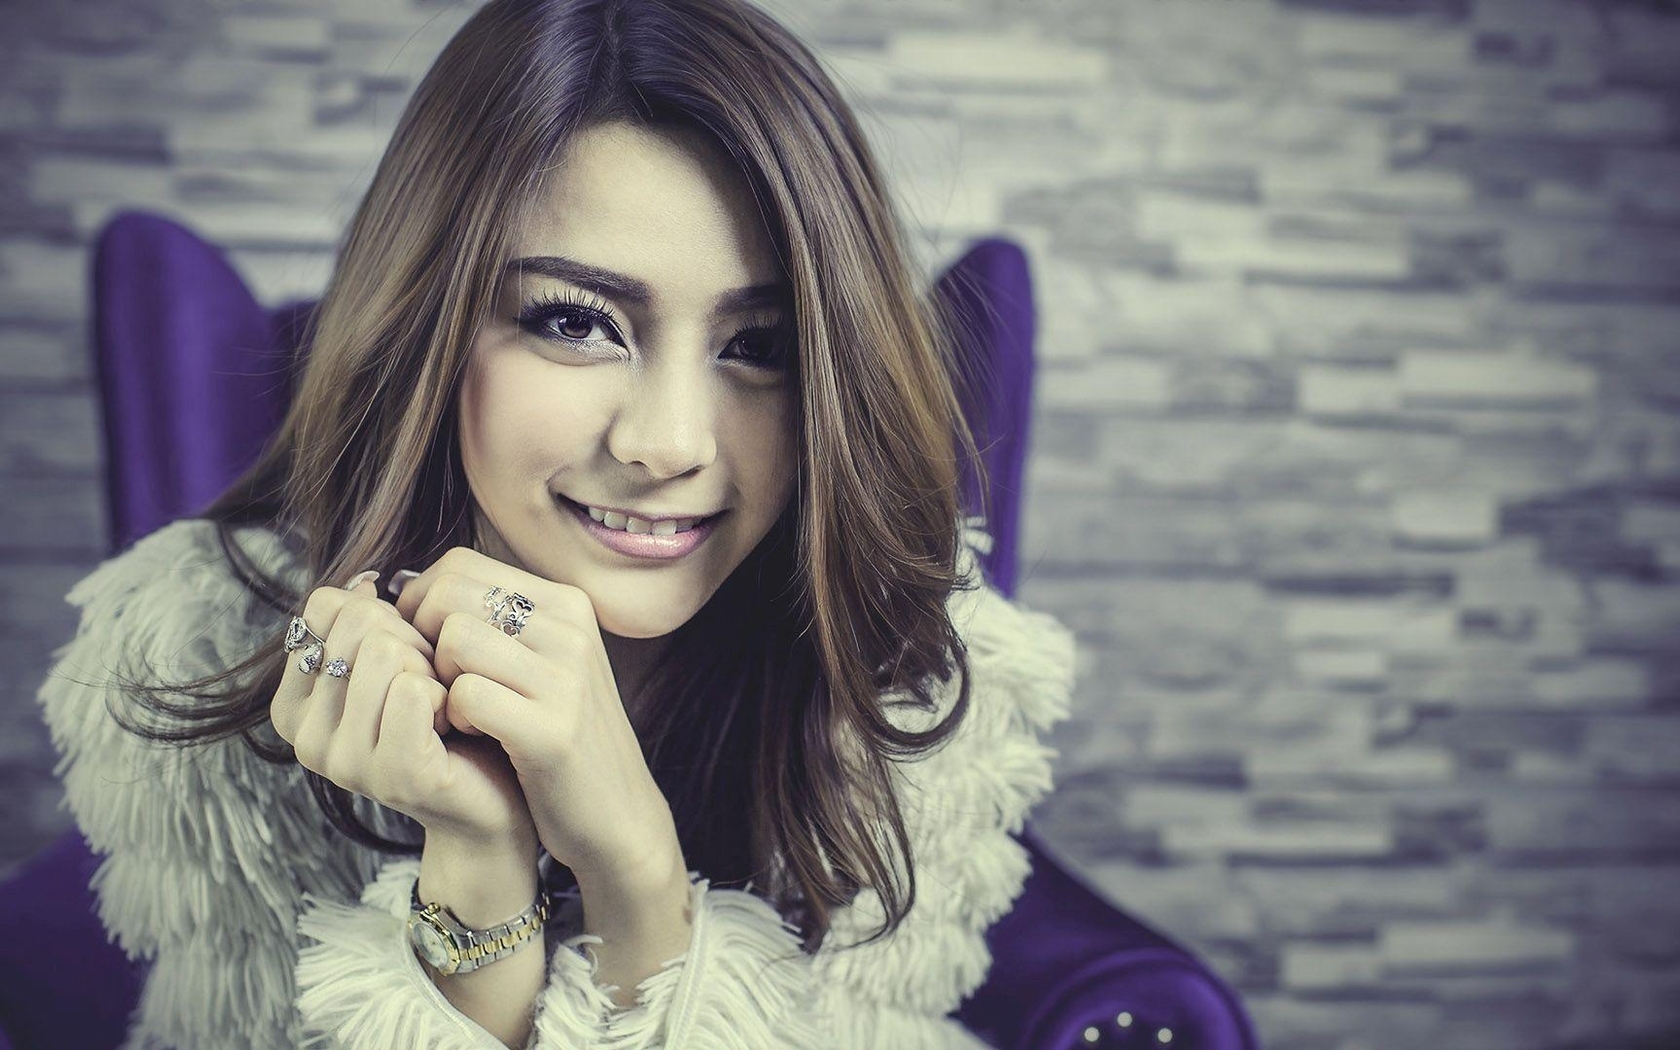 Image: Girl, smiling, asian, jewelry, watch, chair